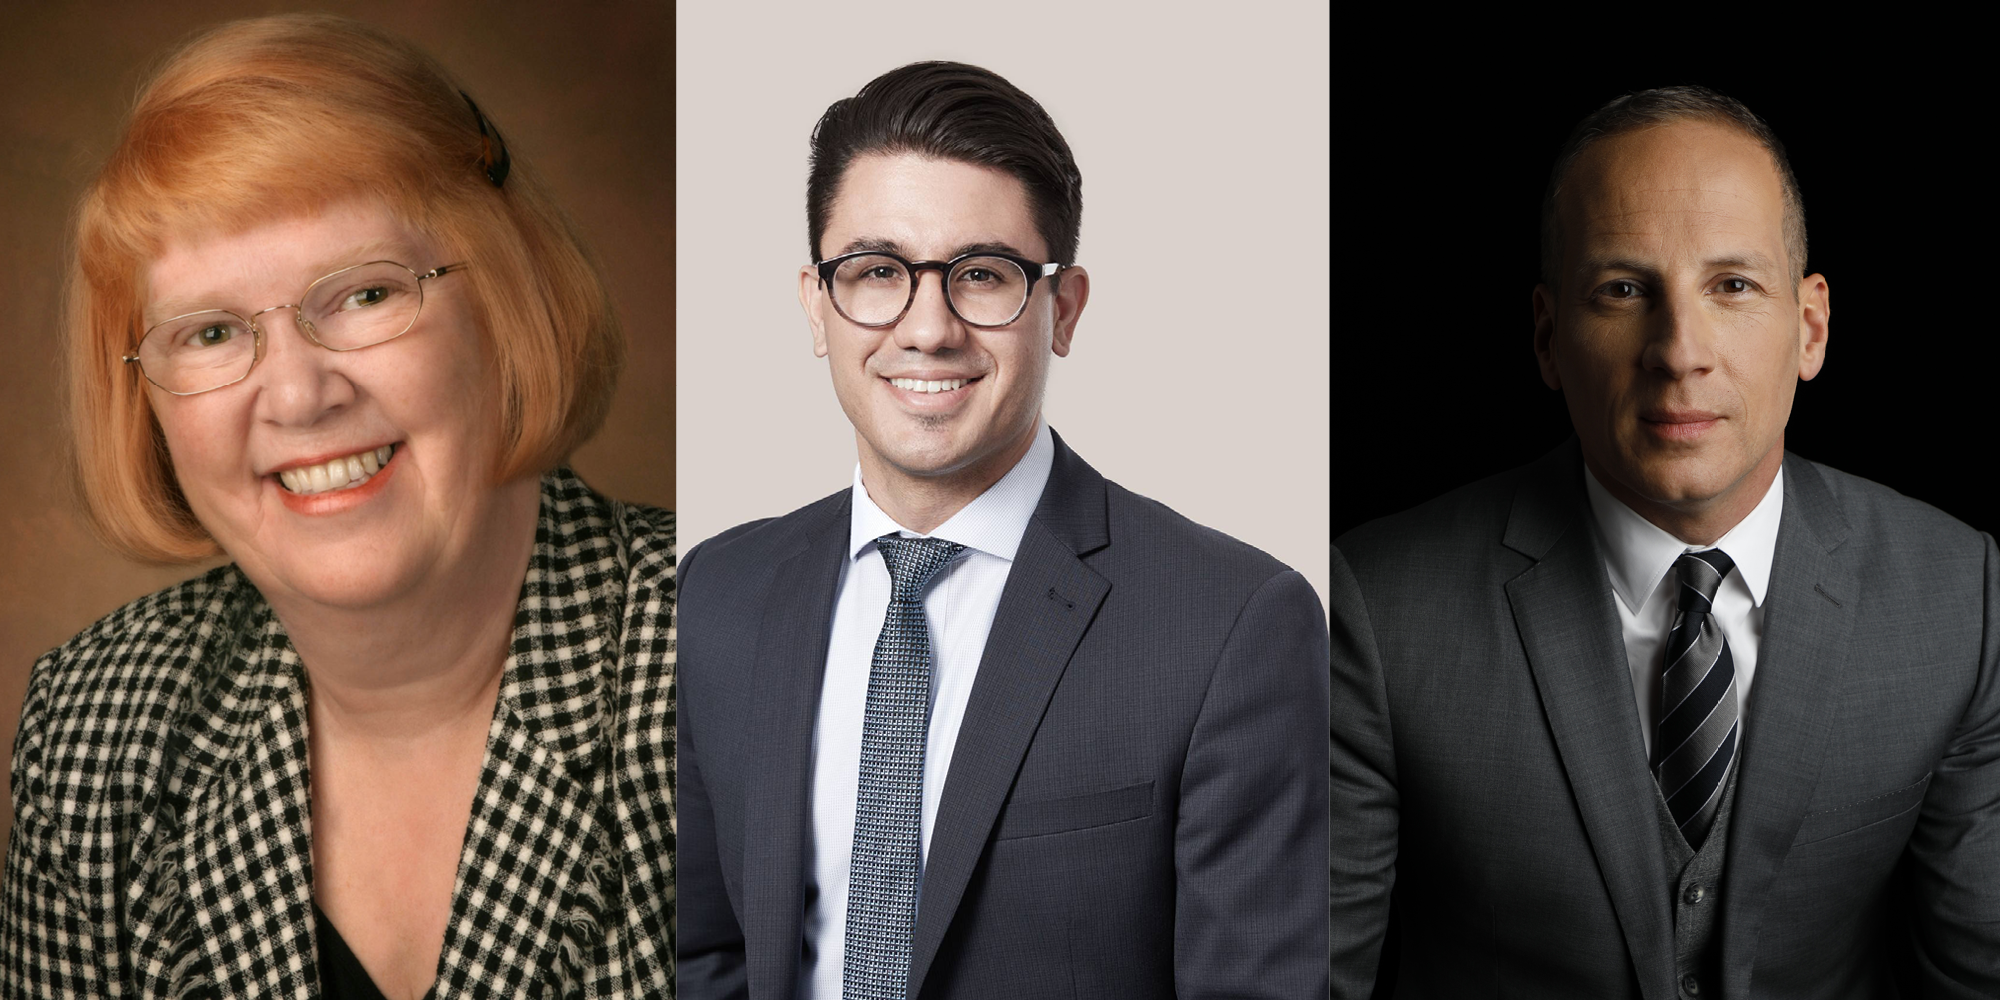 Winners of 2019 Canadian Bar Association awards Daphne Dumont, CM, QC, Law’79, a pioneering woman lawyer; Giancarlo Mignardi, Law’19, a young administrative law scholar; and Michael Battista Law’90, a certified specialist in immigration law. 